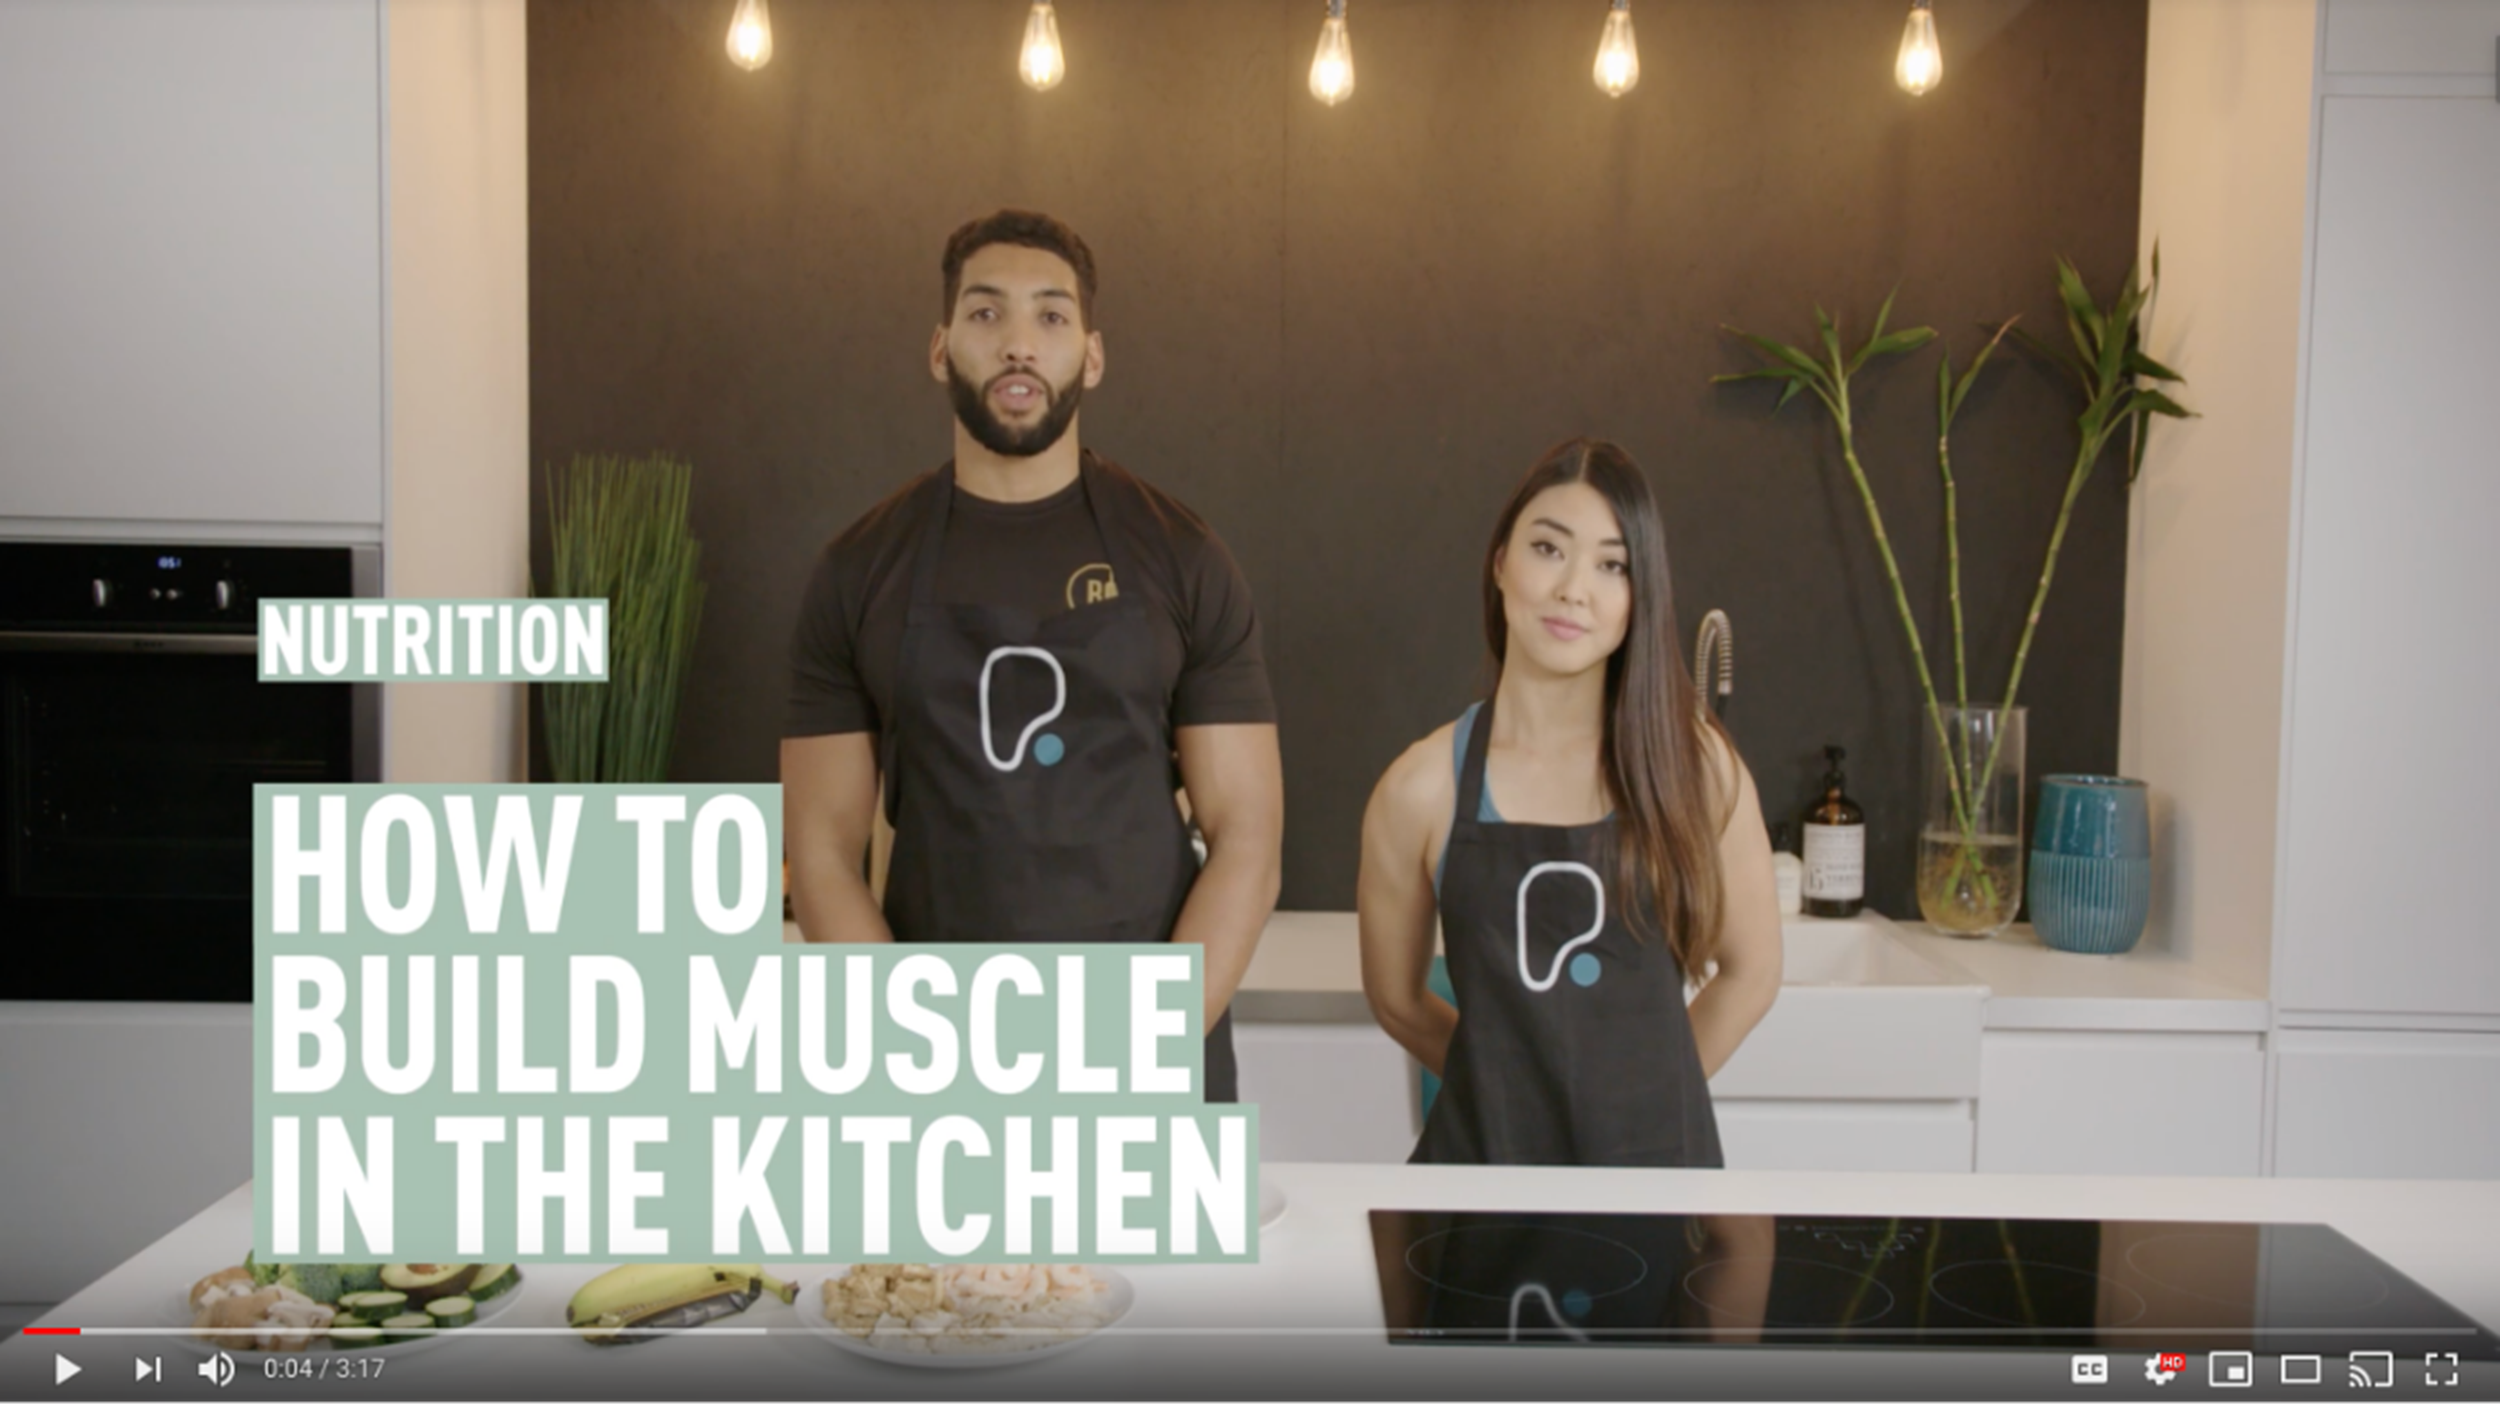 How to build muscle in the kitchen with @kaypuregym